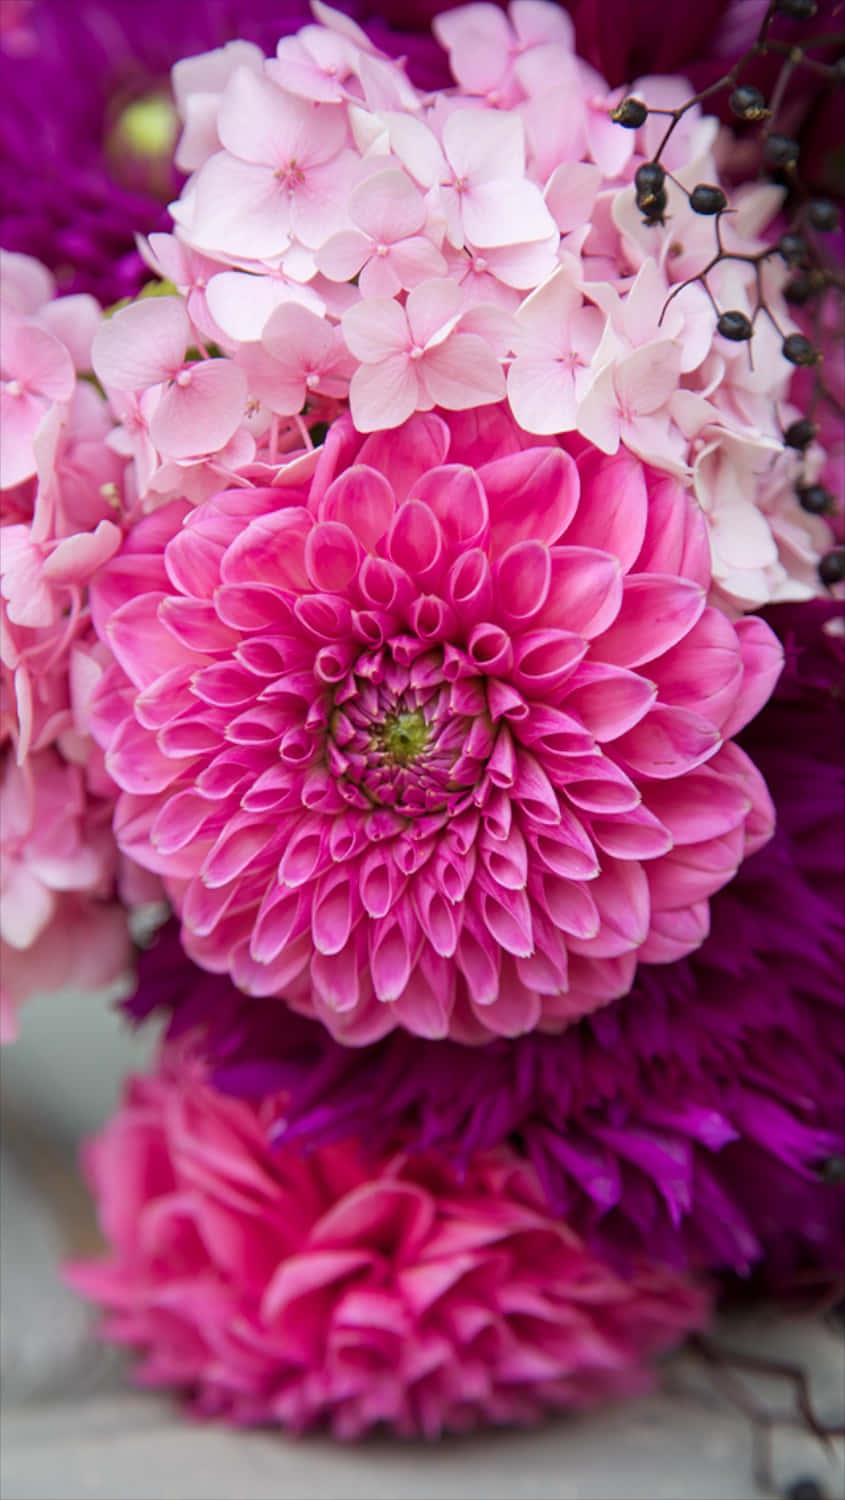 Express your style with this beautiful pink flower phone Wallpaper